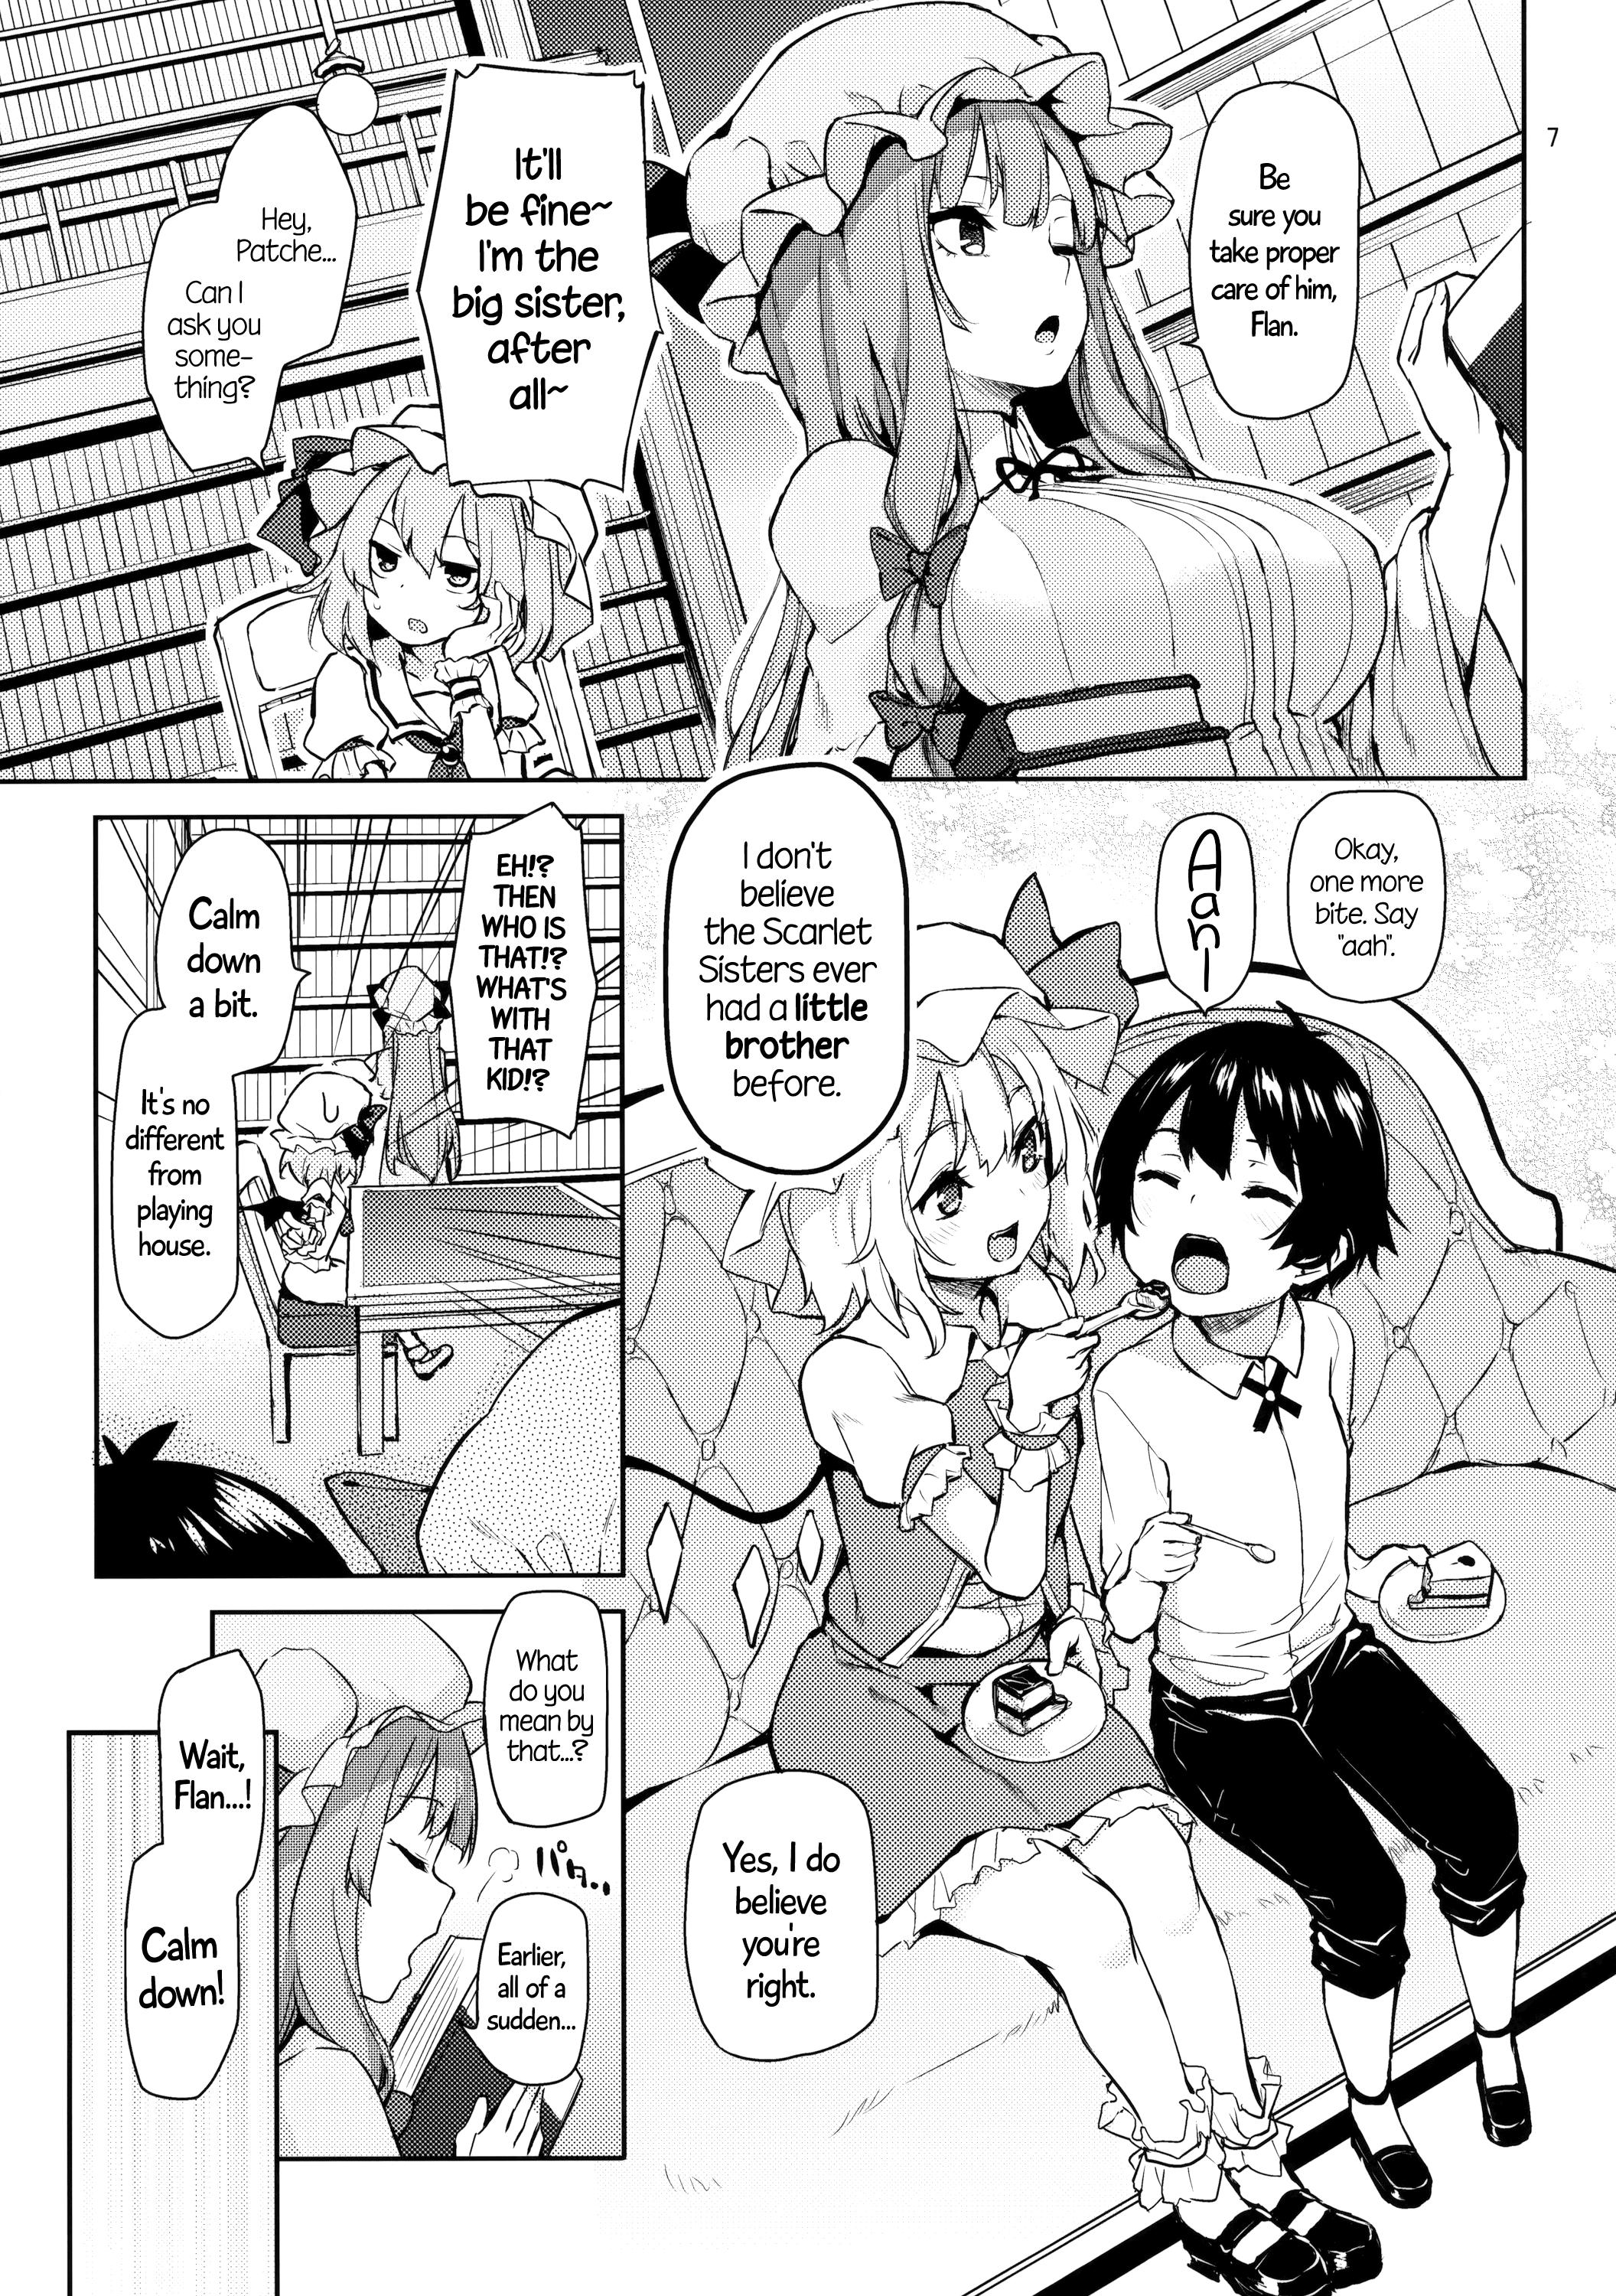 Stretch (Reitaisai 13) [Anmitsuyomogitei (Michiking)] Osewa Shinaide Flan Onee-chan! | Don't Take Care Of Me, Flan Onee-chan! (Touhou Project) [English] =Facedesk + CW= - Touhou project Com - Page 7